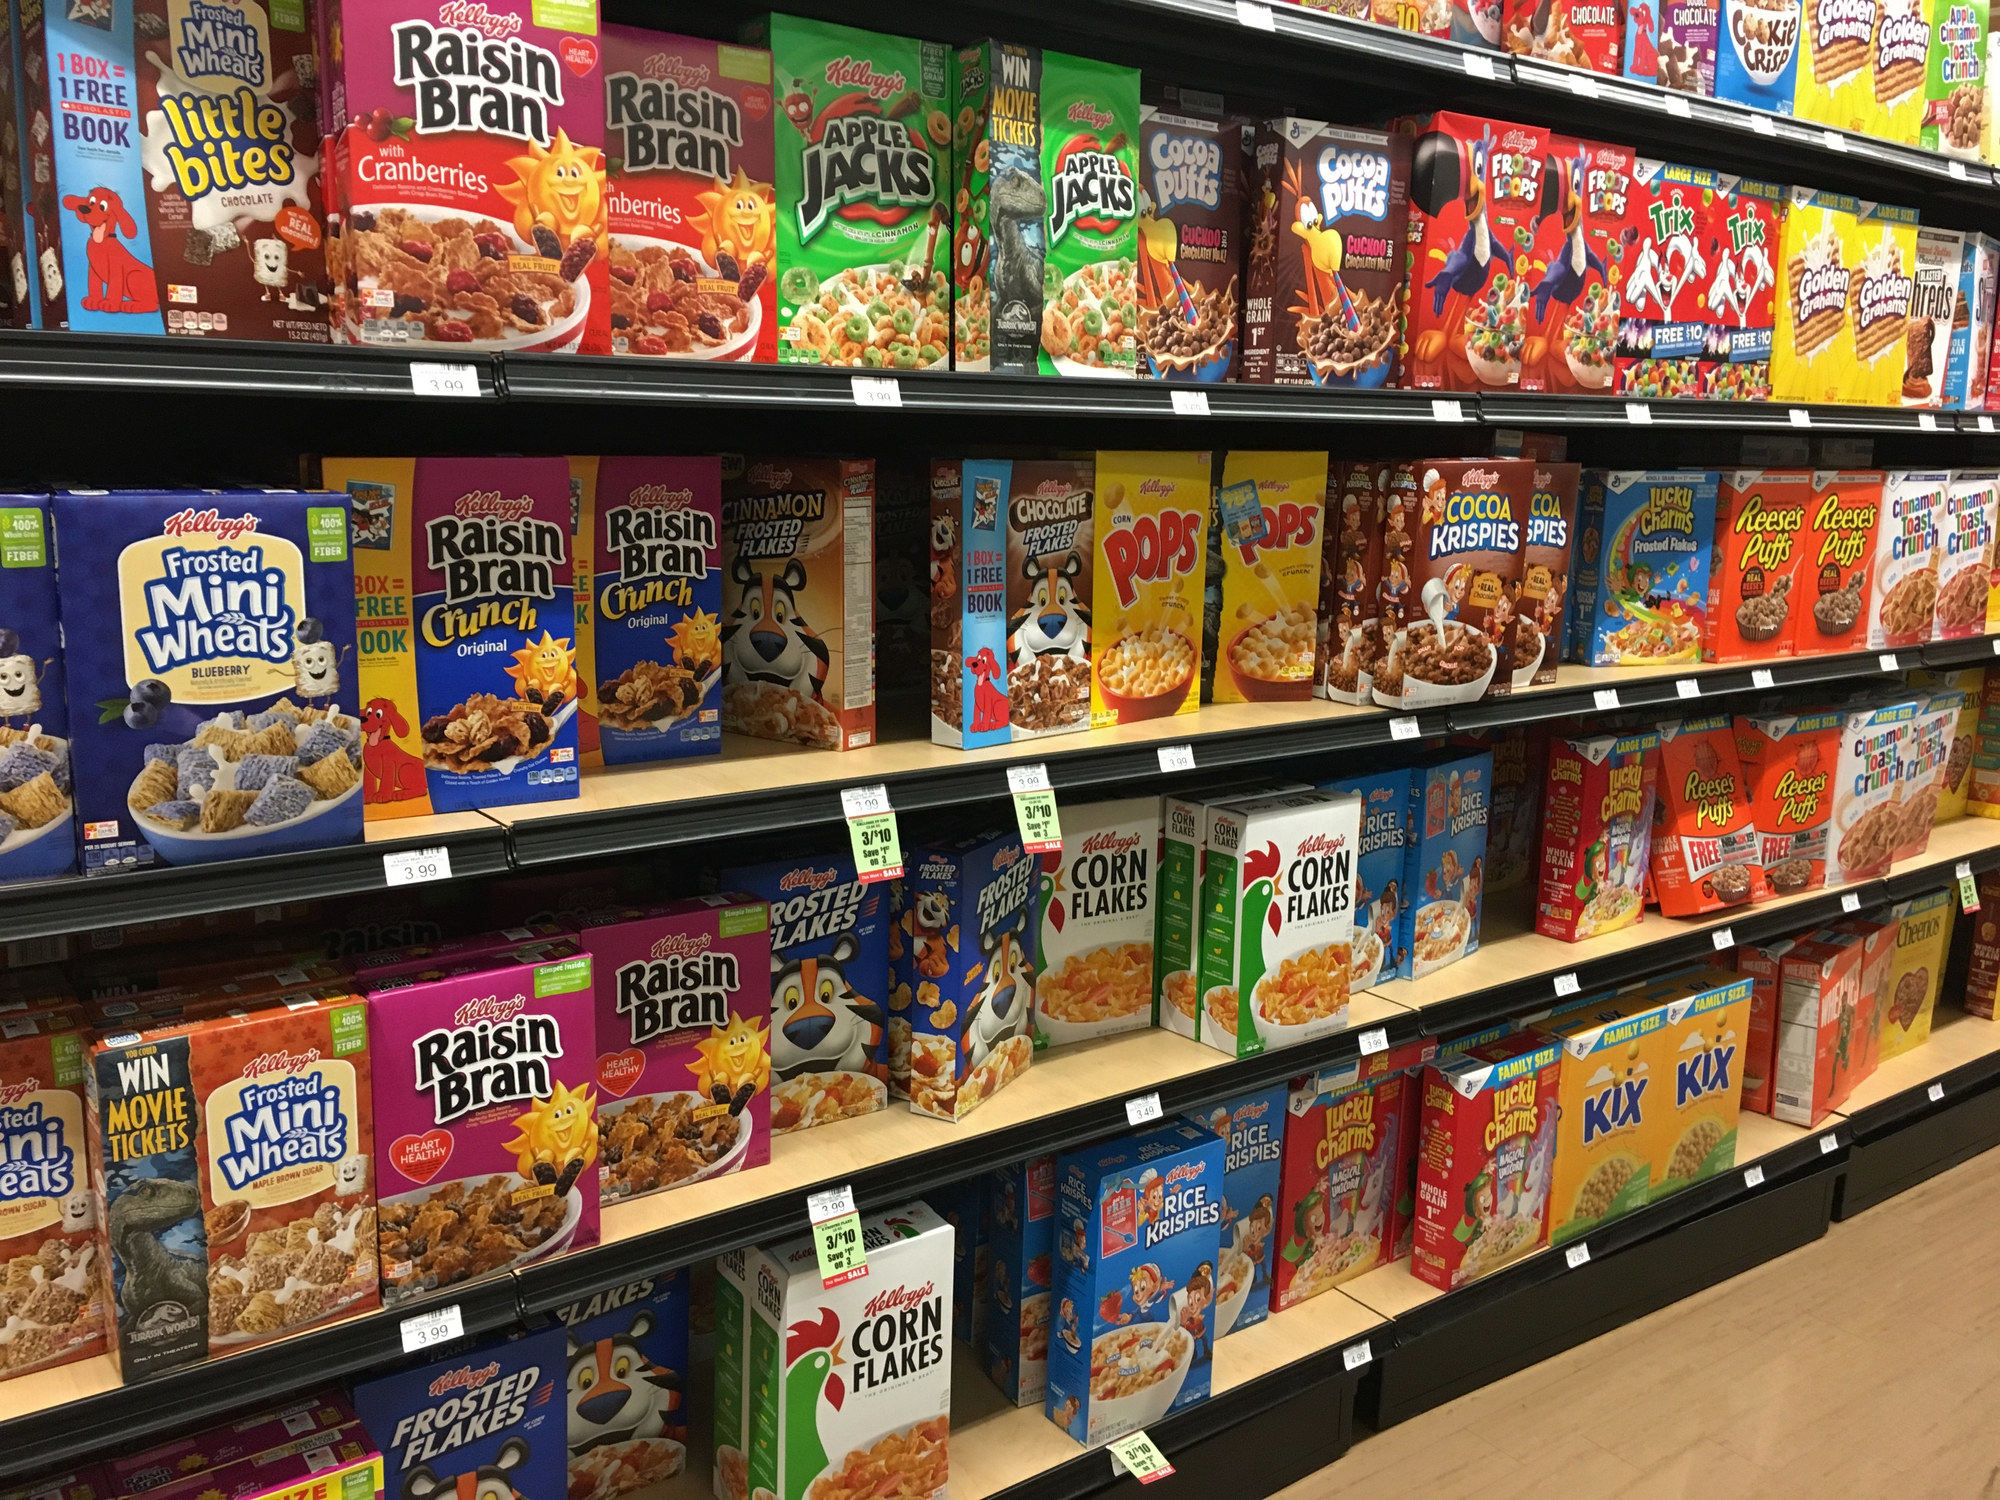 The cereal aisle at the grocery store